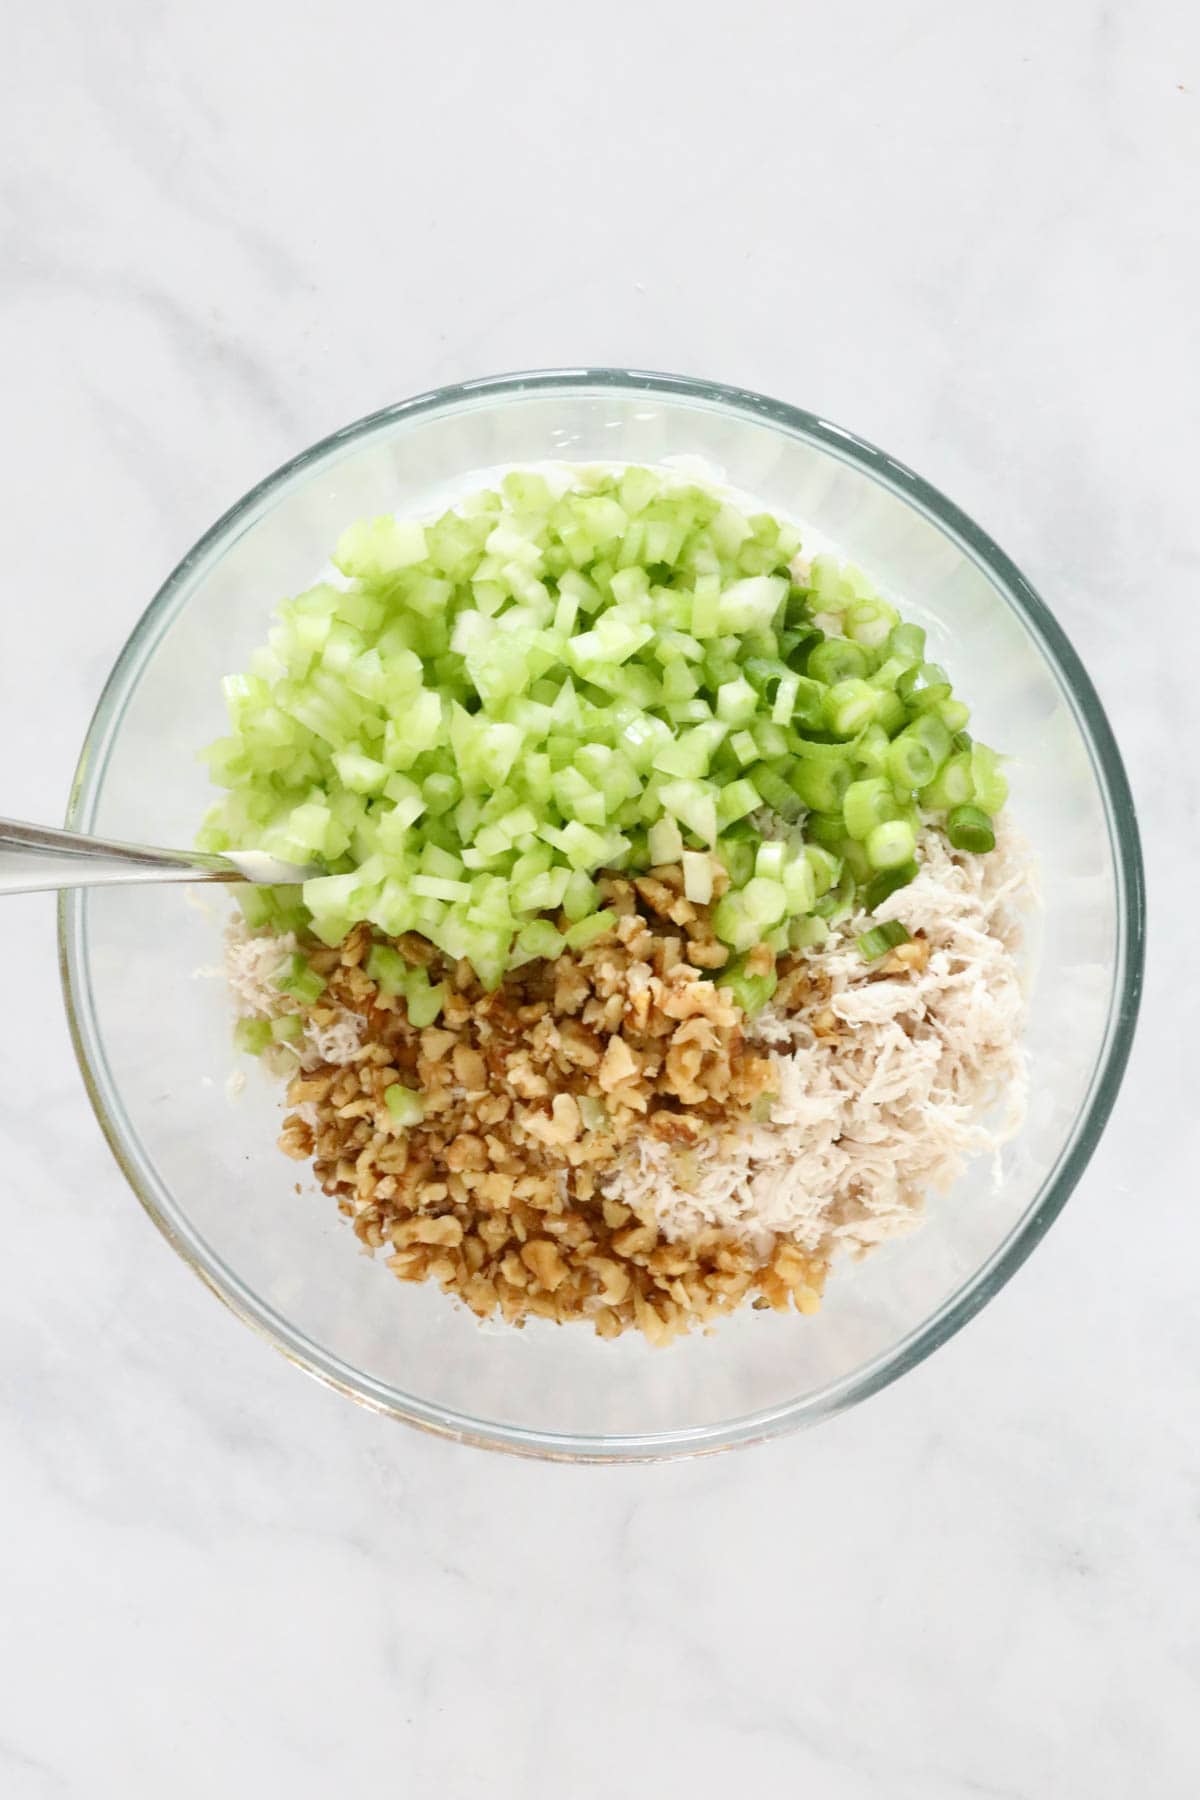 Chopped celery, spring onions, chopped walnuts and shredded chicken added to the mayo dressing.